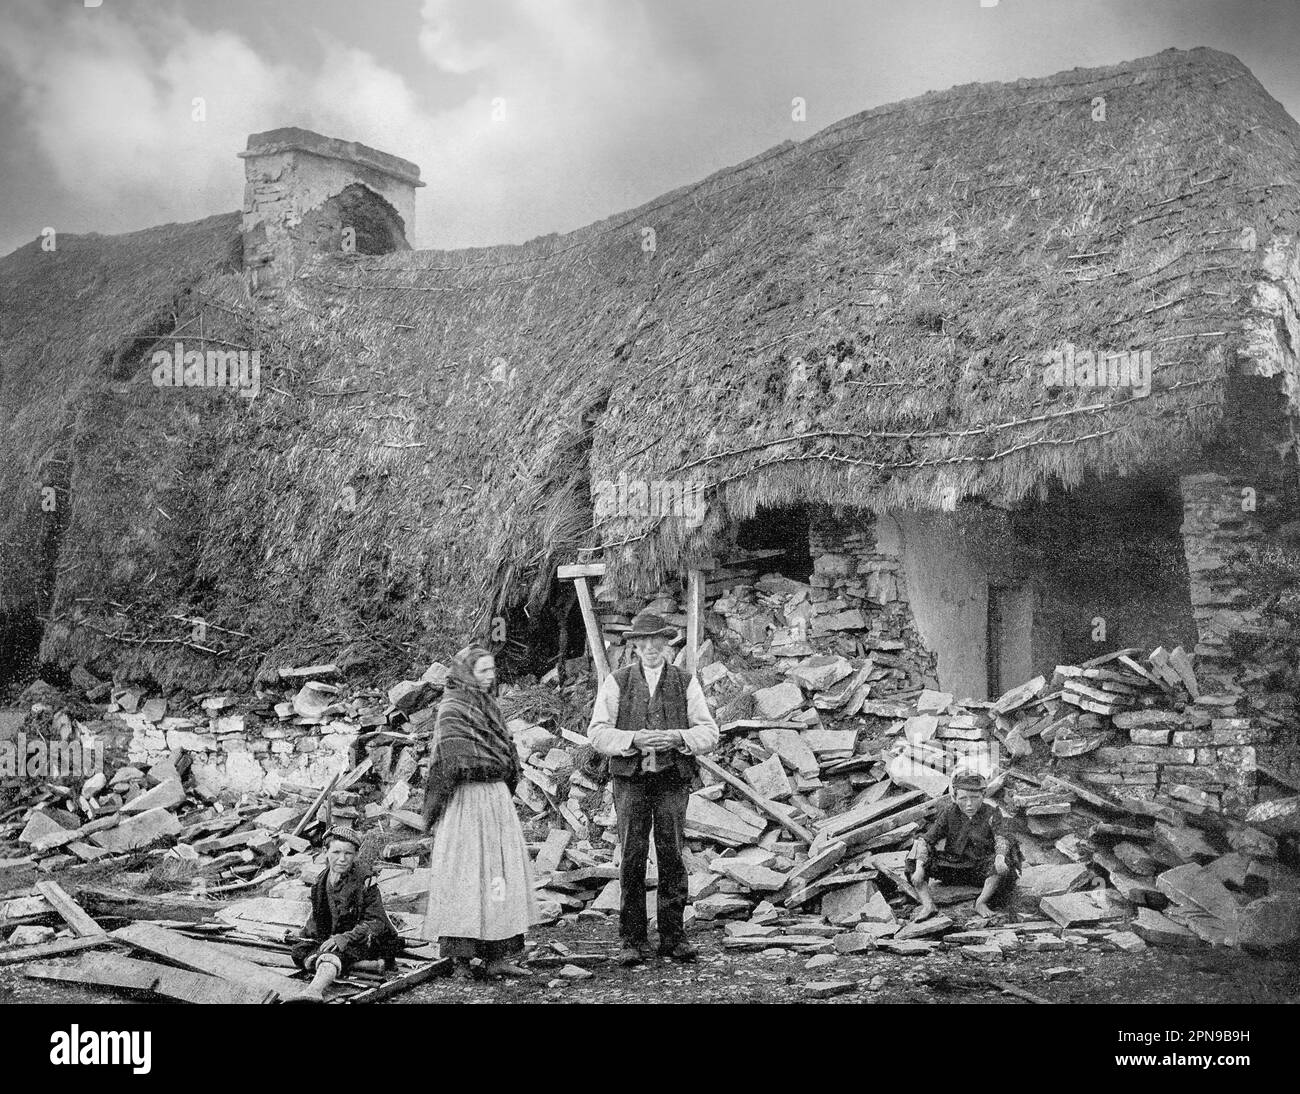 An eviction scene in County Clare in the mid-19th century.  The tenant-at-will occupants were turfed out by mostly Anglo-Irish landlords when they fell on hard times, often as a result of the Great Irish Famine. Stock Photo